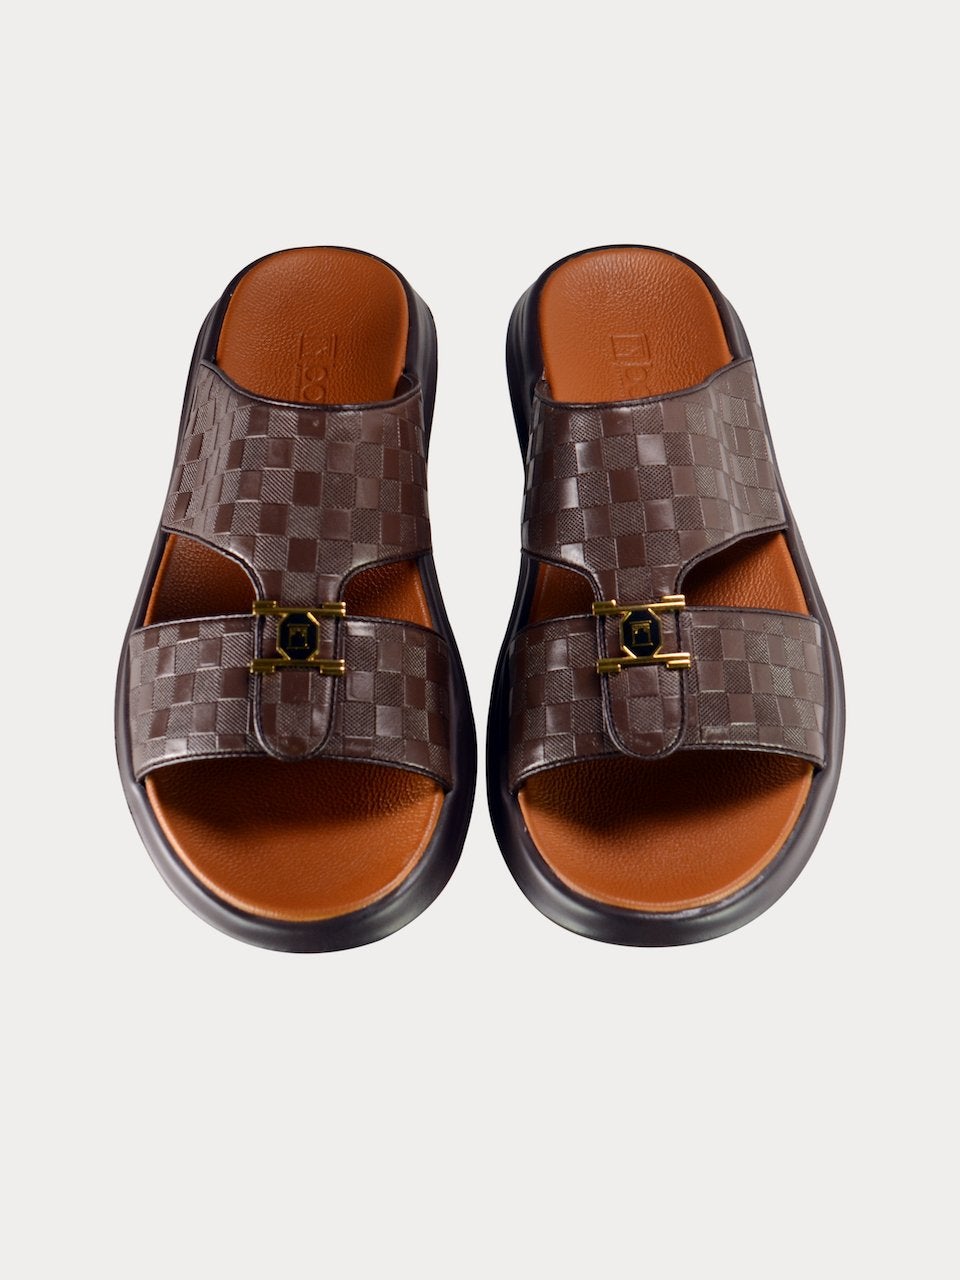 Barjeel Uno B197093 Check Detail Arabic Leather Sandals #color_Brown